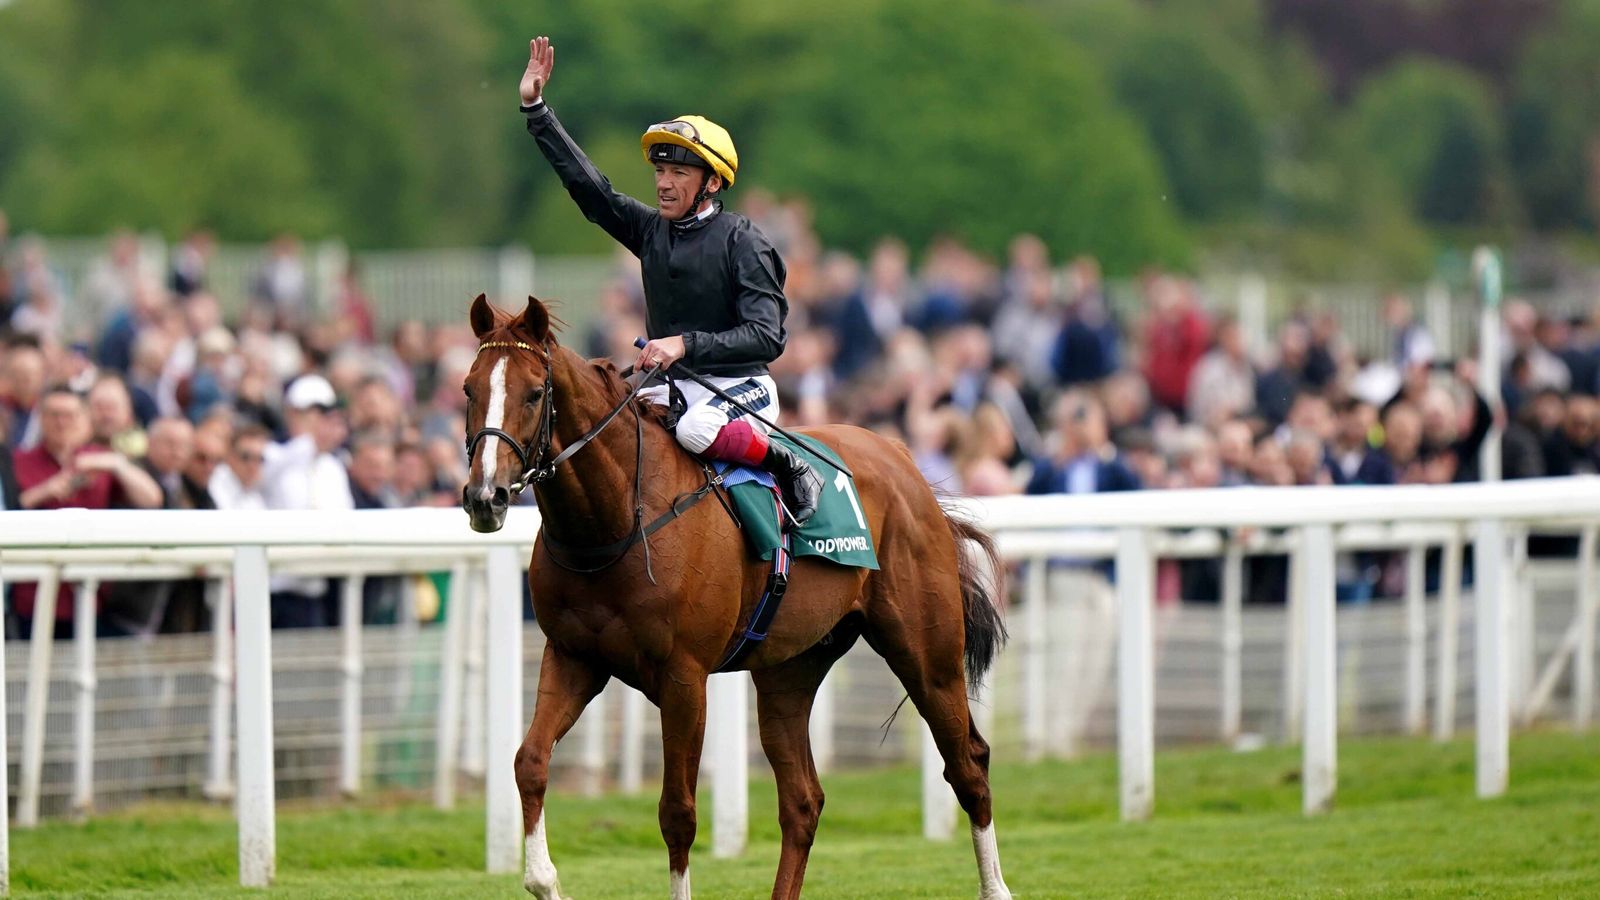 Goodwood Cup: John Gosden not ruling out Stradivarius continuing to race after potential swansong